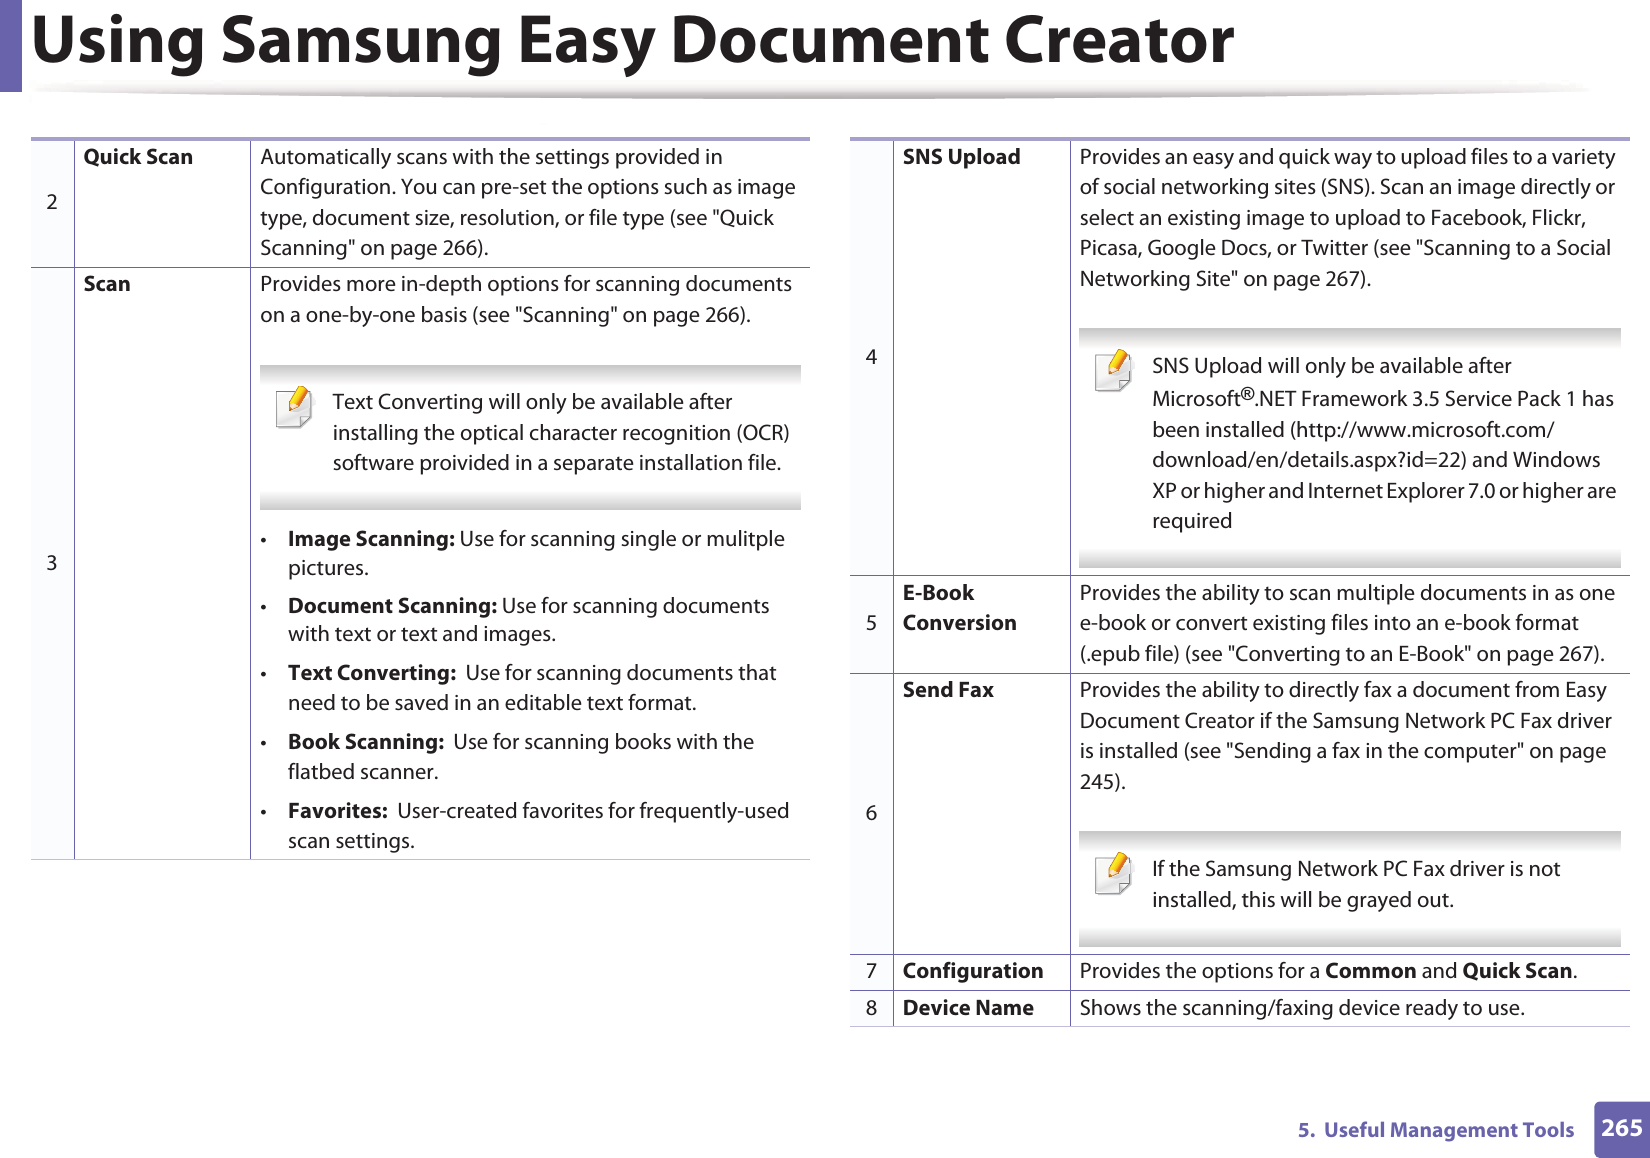 Using Samsung Easy Document Creator2655.  Useful Management Tools2Quick Scan Automatically scans with the settings provided in Configuration. You can pre-set the options such as image type, document size, resolution, or file type (see &quot;Quick Scanning&quot; on page 266).3Scan Provides more in-depth options for scanning documents on a one-by-one basis (see &quot;Scanning&quot; on page 266). Text Converting will only be available after installing the optical character recognition (OCR) software proivided in a separate installation file. •Image Scanning: Use for scanning single or mulitple pictures.•Document Scanning: Use for scanning documents with text or text and images.•Text Converting:  Use for scanning documents that need to be saved in an editable text format.•Book Scanning:  Use for scanning books with the flatbed scanner.•Favorites:  User-created favorites for frequently-used scan settings.4SNS Upload Provides an easy and quick way to upload files to a variety of social networking sites (SNS). Scan an image directly or select an existing image to upload to Facebook, Flickr, Picasa, Google Docs, or Twitter (see &quot;Scanning to a Social Networking Site&quot; on page 267). SNS Upload will only be available after Microsoft®.NET Framework 3.5 Service Pack 1 has been installed (http://www.microsoft.com/download/en/details.aspx?id=22) and Windows XP or higher and Internet Explorer 7.0 or higher are required 5E-Book ConversionProvides the ability to scan multiple documents in as one e-book or convert existing files into an e-book format (.epub file) (see &quot;Converting to an E-Book&quot; on page 267).6Send Fax Provides the ability to directly fax a document from Easy Document Creator if the Samsung Network PC Fax driver is installed (see &quot;Sending a fax in the computer&quot; on page 245). If the Samsung Network PC Fax driver is not installed, this will be grayed out. 7Configuration Provides the options for a Common and Quick Scan.8Device Name Shows the scanning/faxing device ready to use.